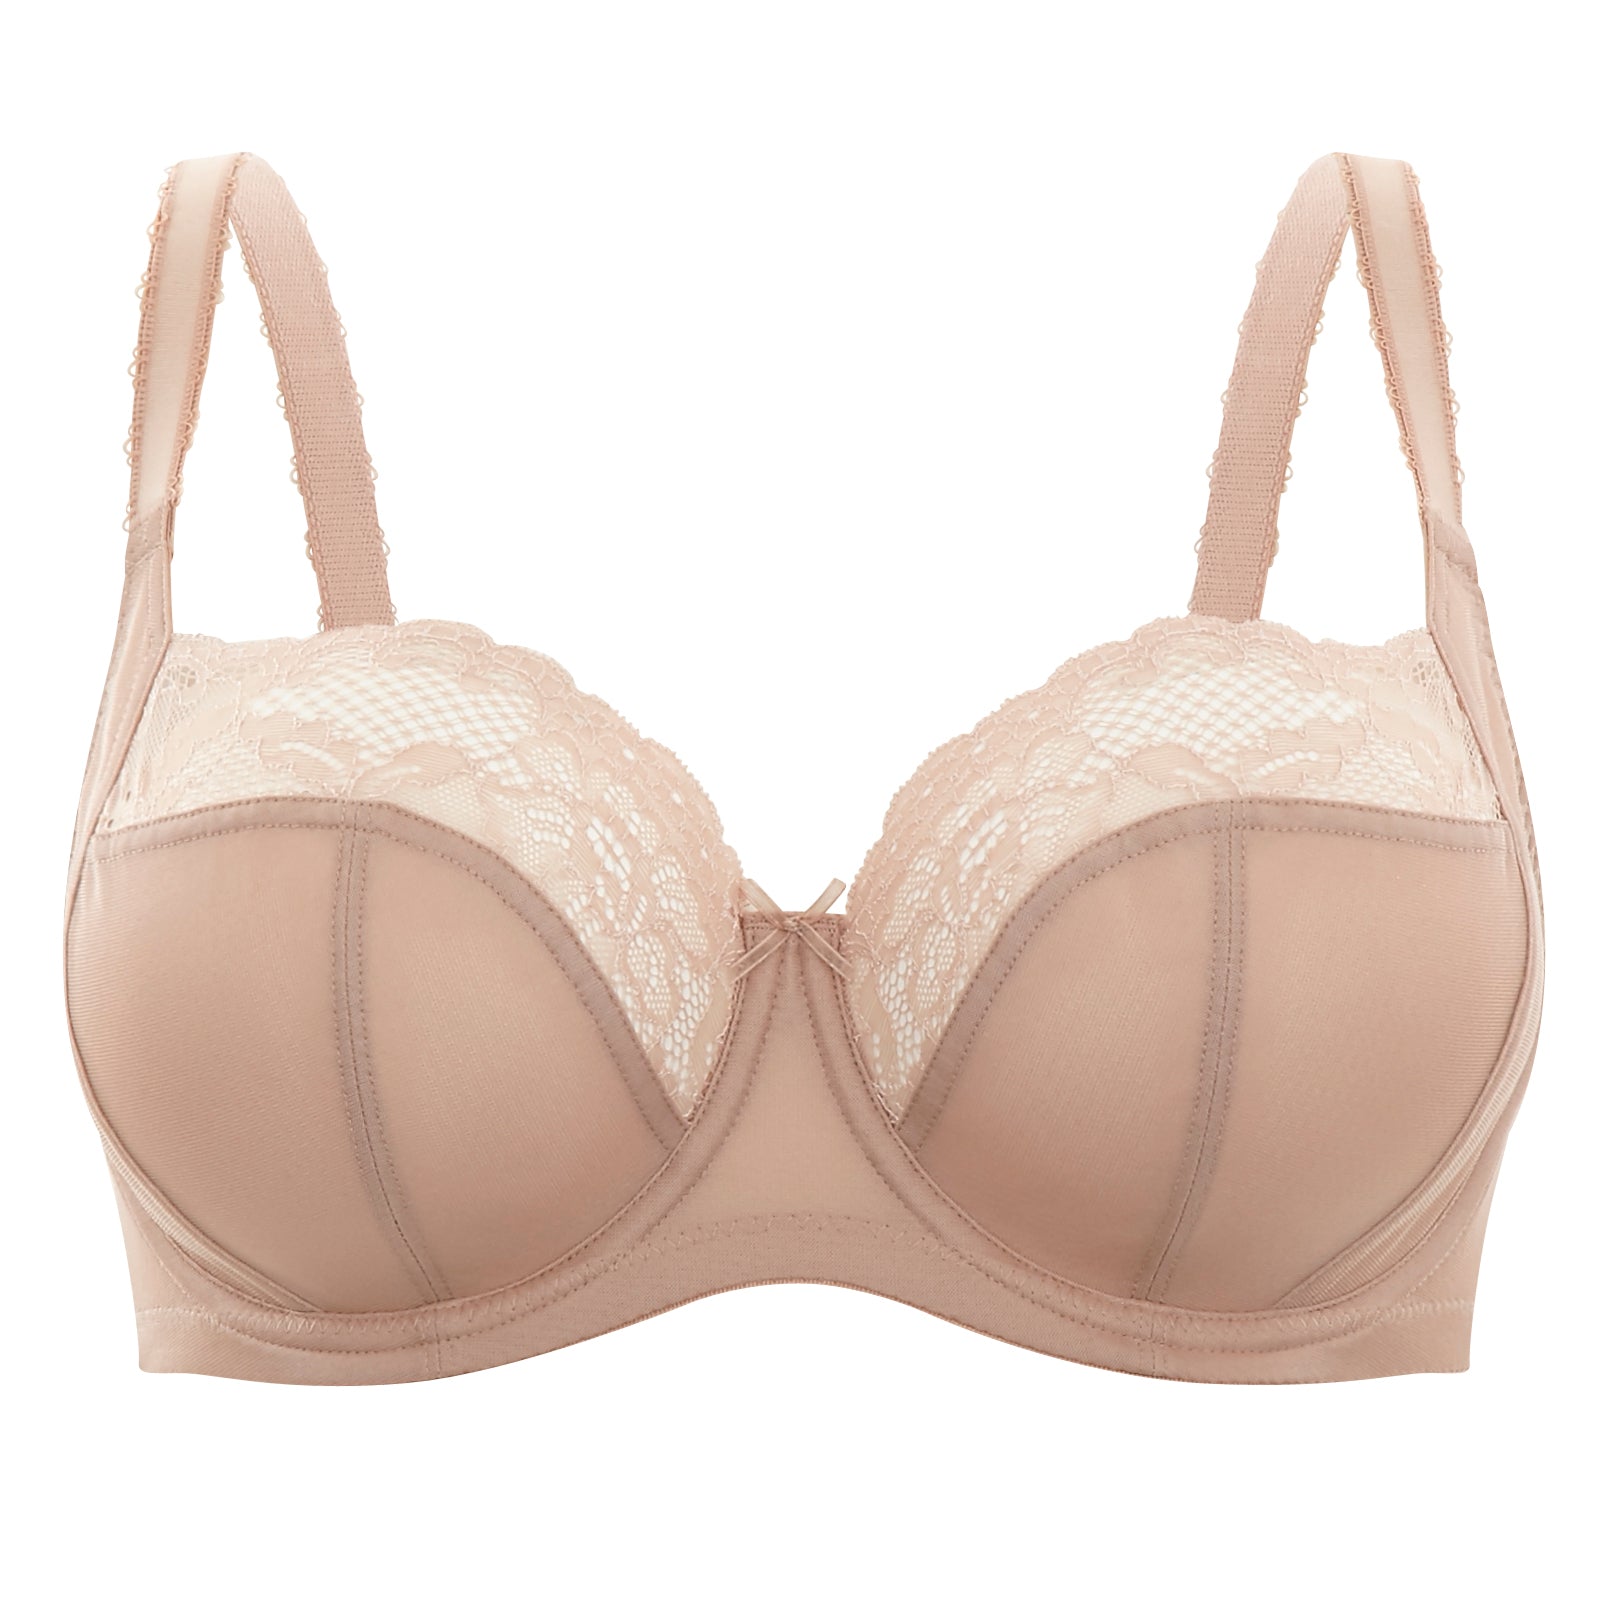 Panache Lingerie on X: The much loved Jasmine Balconnet Bra is a